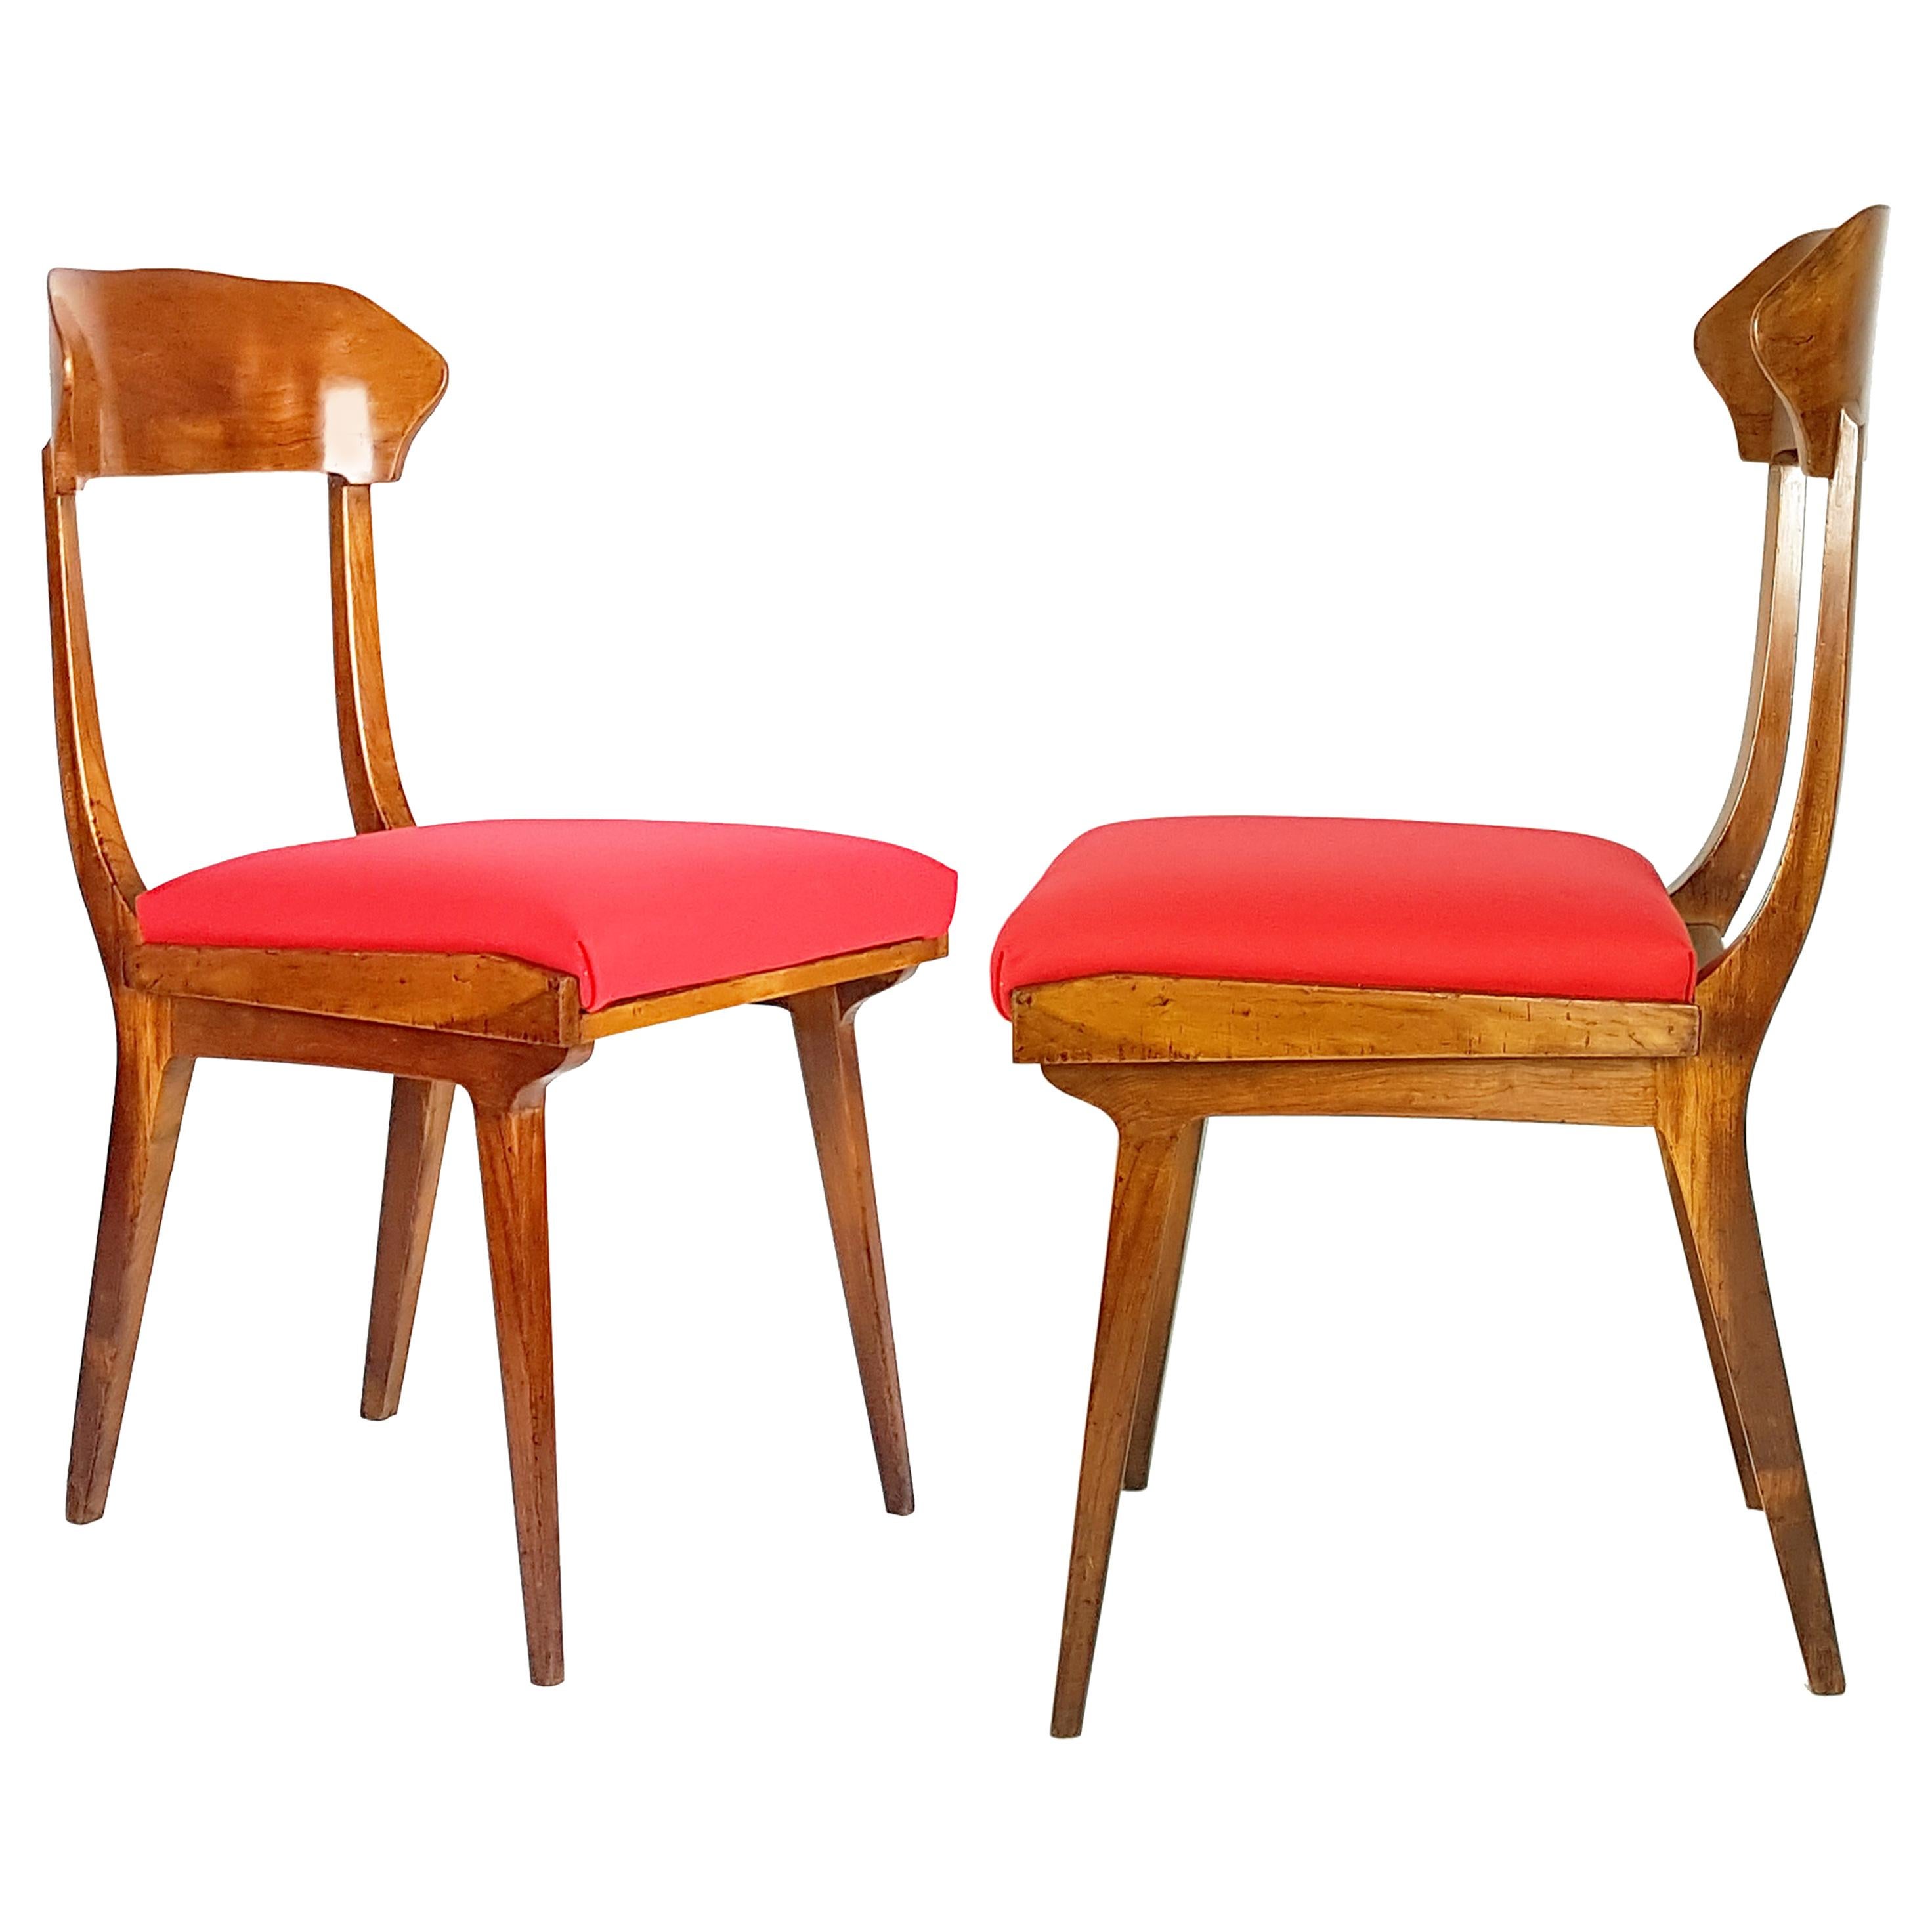 Midcentury Wood and Red Fabric Side Chairs from Fratelli Barni Mobili d'Arte For Sale